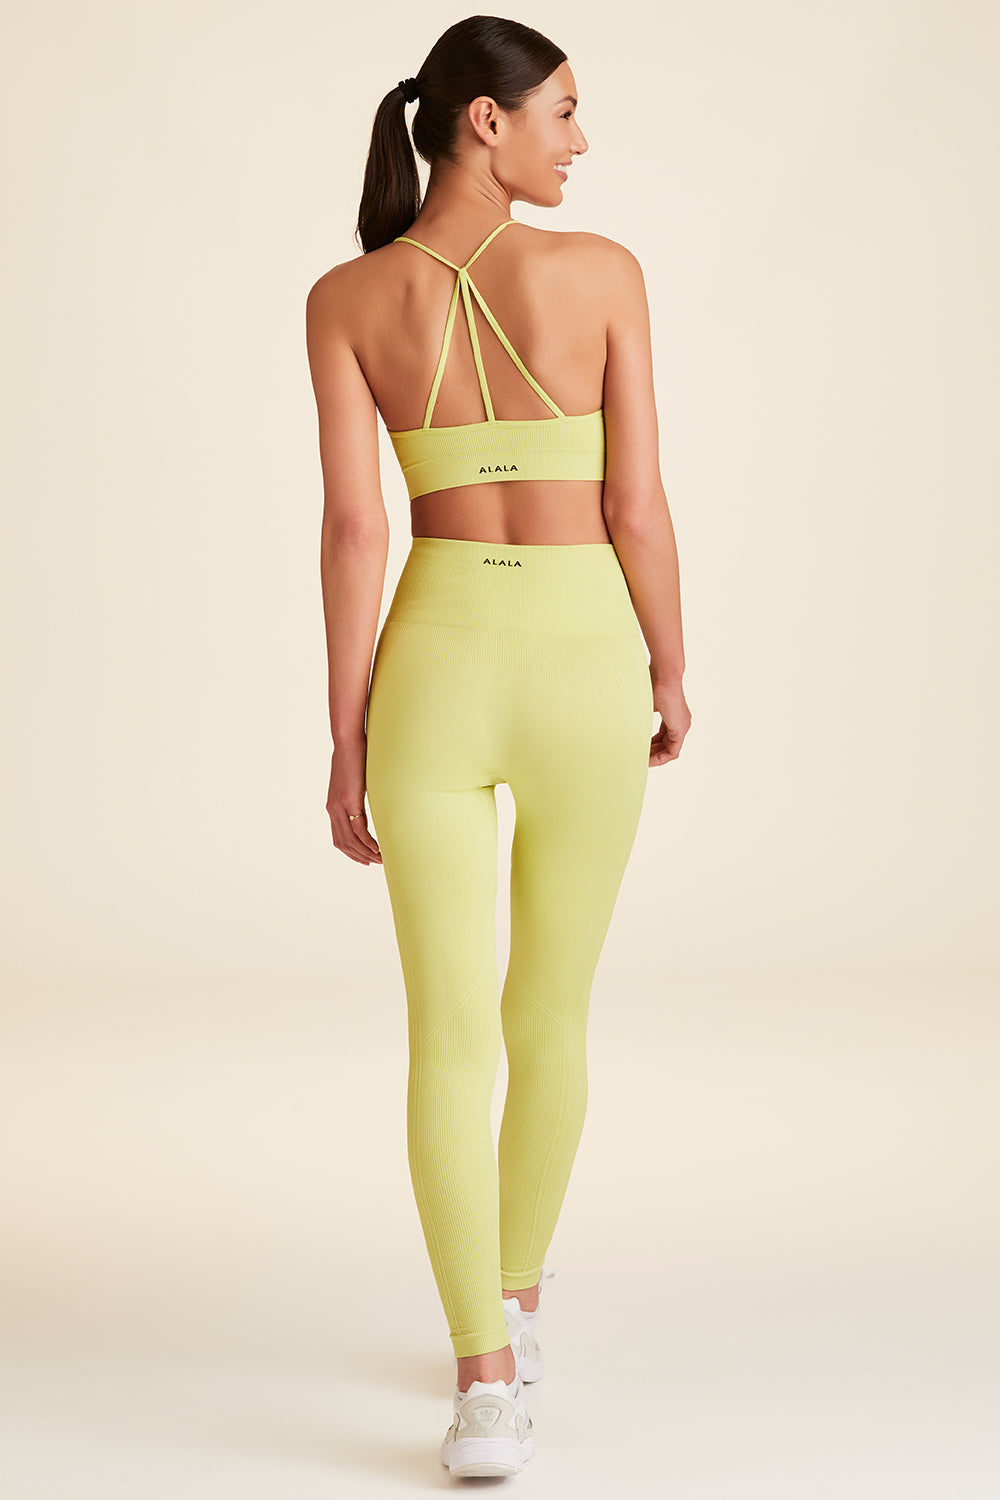 Chartreuse seamless bra for women from Alala activewear